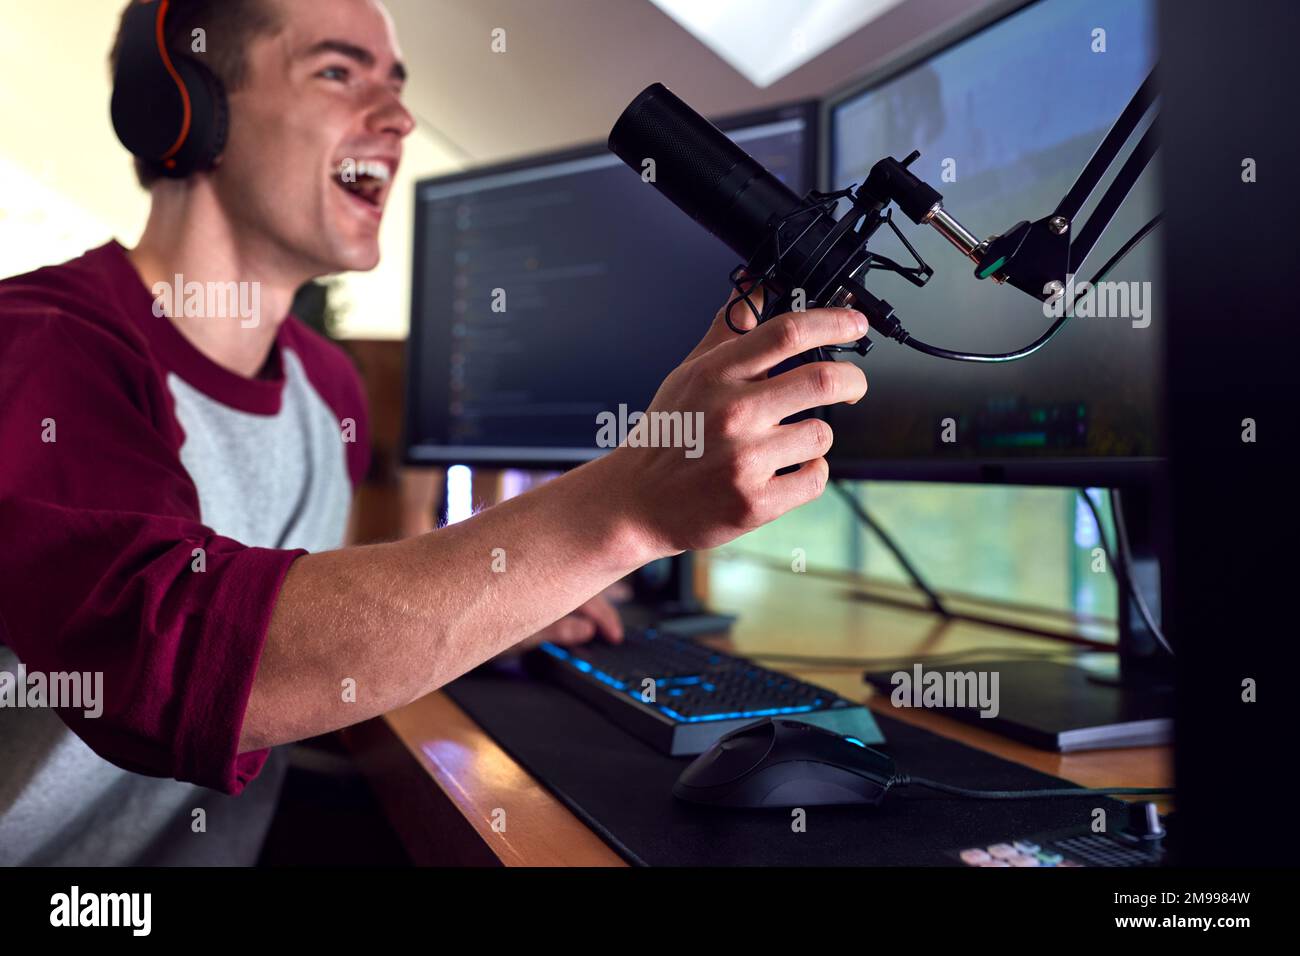 Man Gaming At Home Wearing Wireless Headphones Sitting At Desk With Multiple Monitors Stock Photo